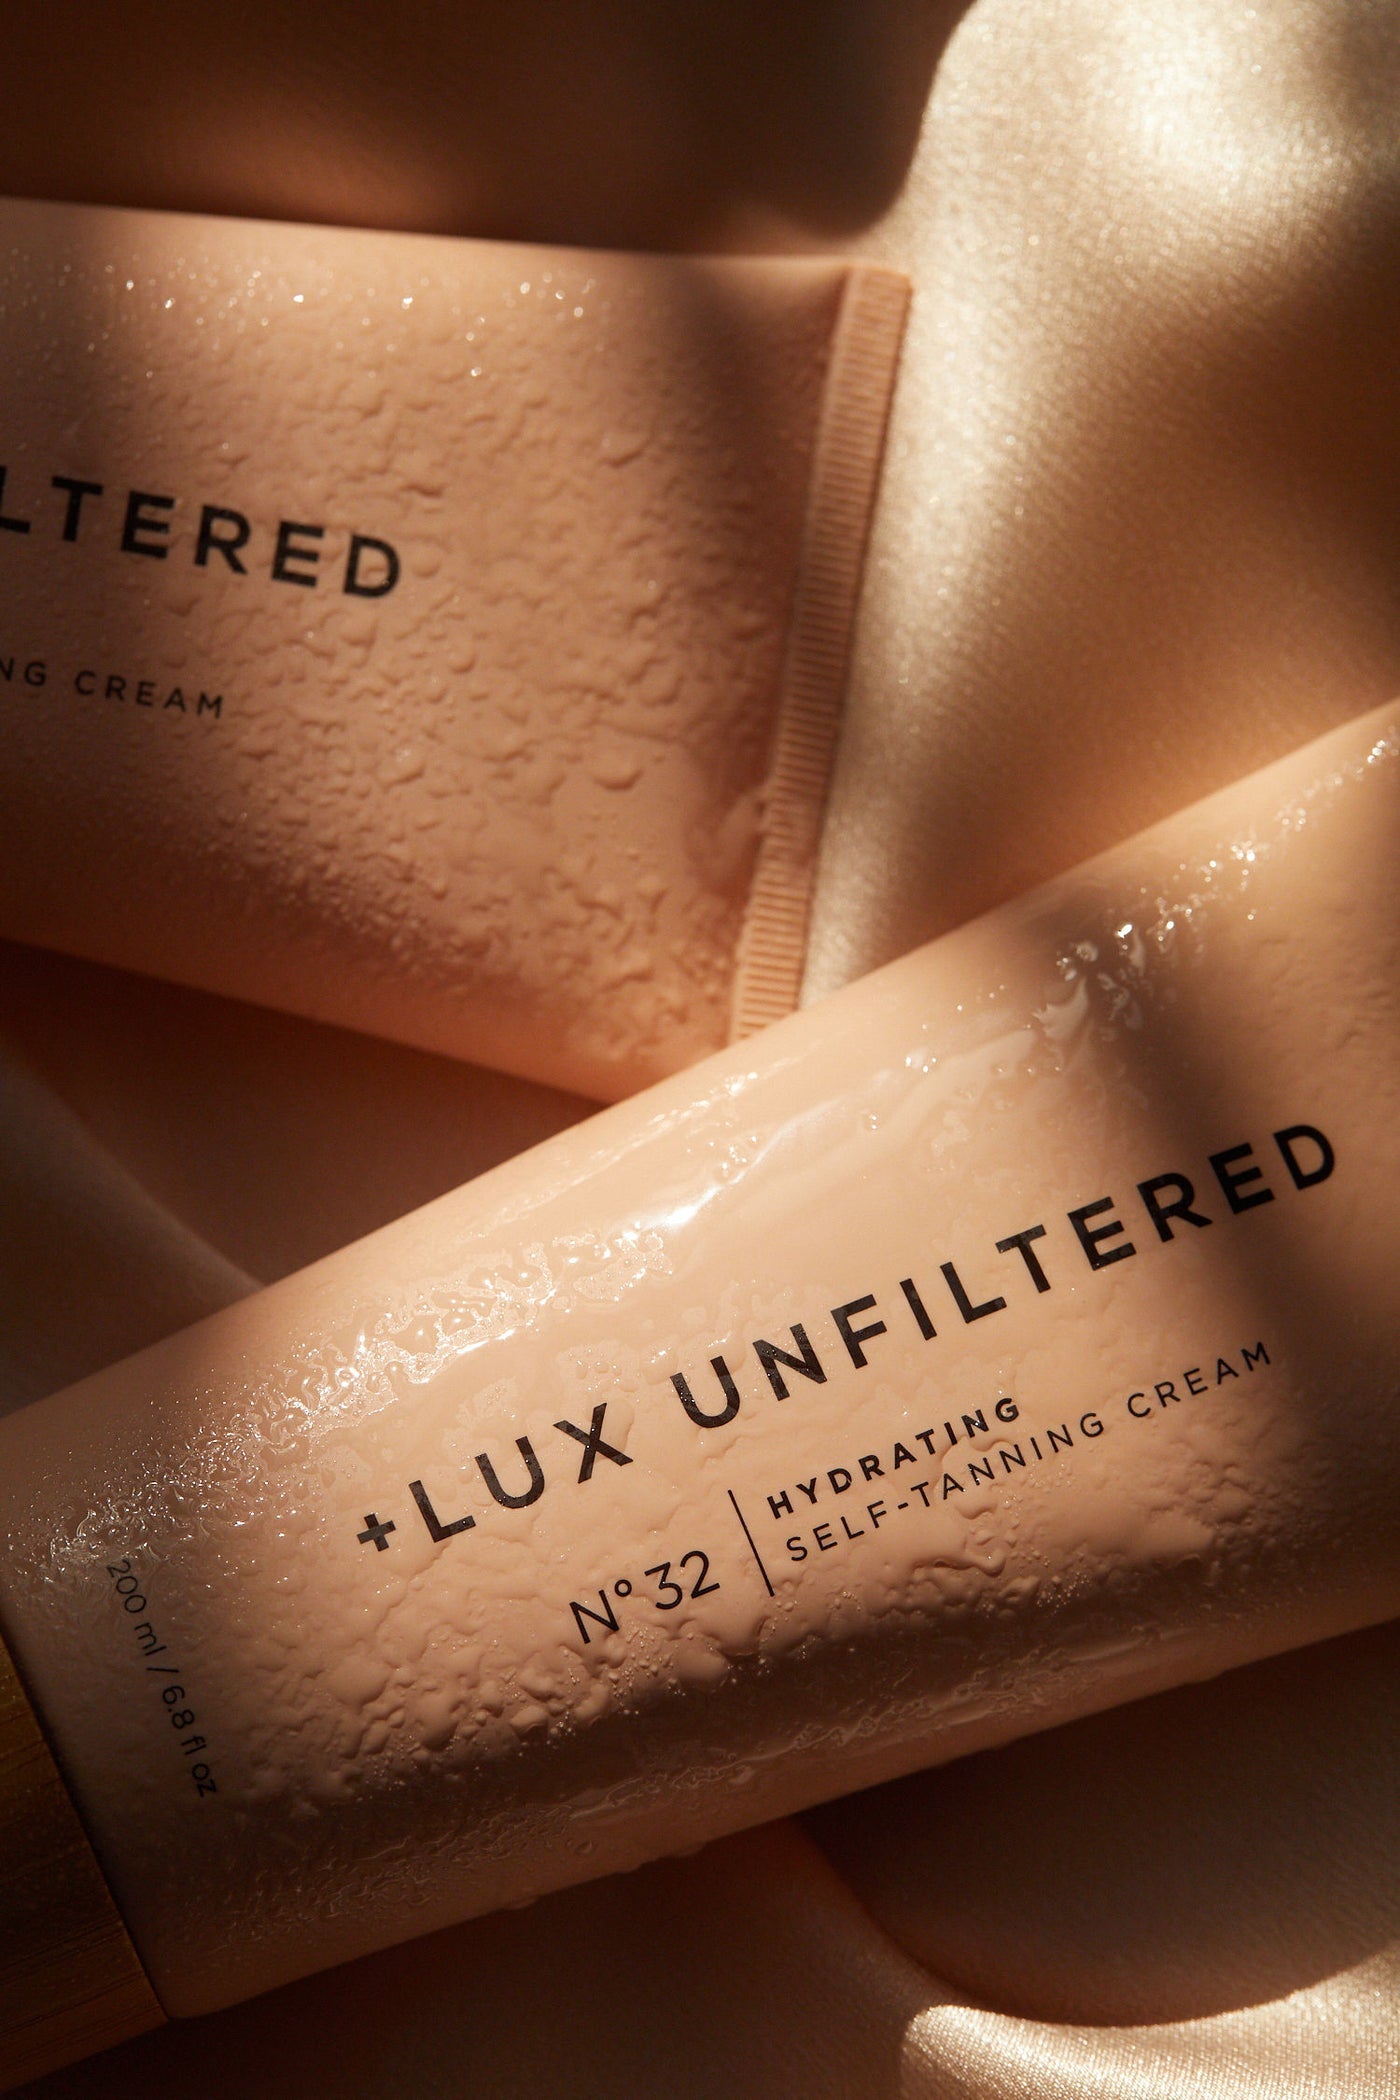 Nº32 Hydrating Gradual Self-Tanning Cream - + LUX UNFILTERED